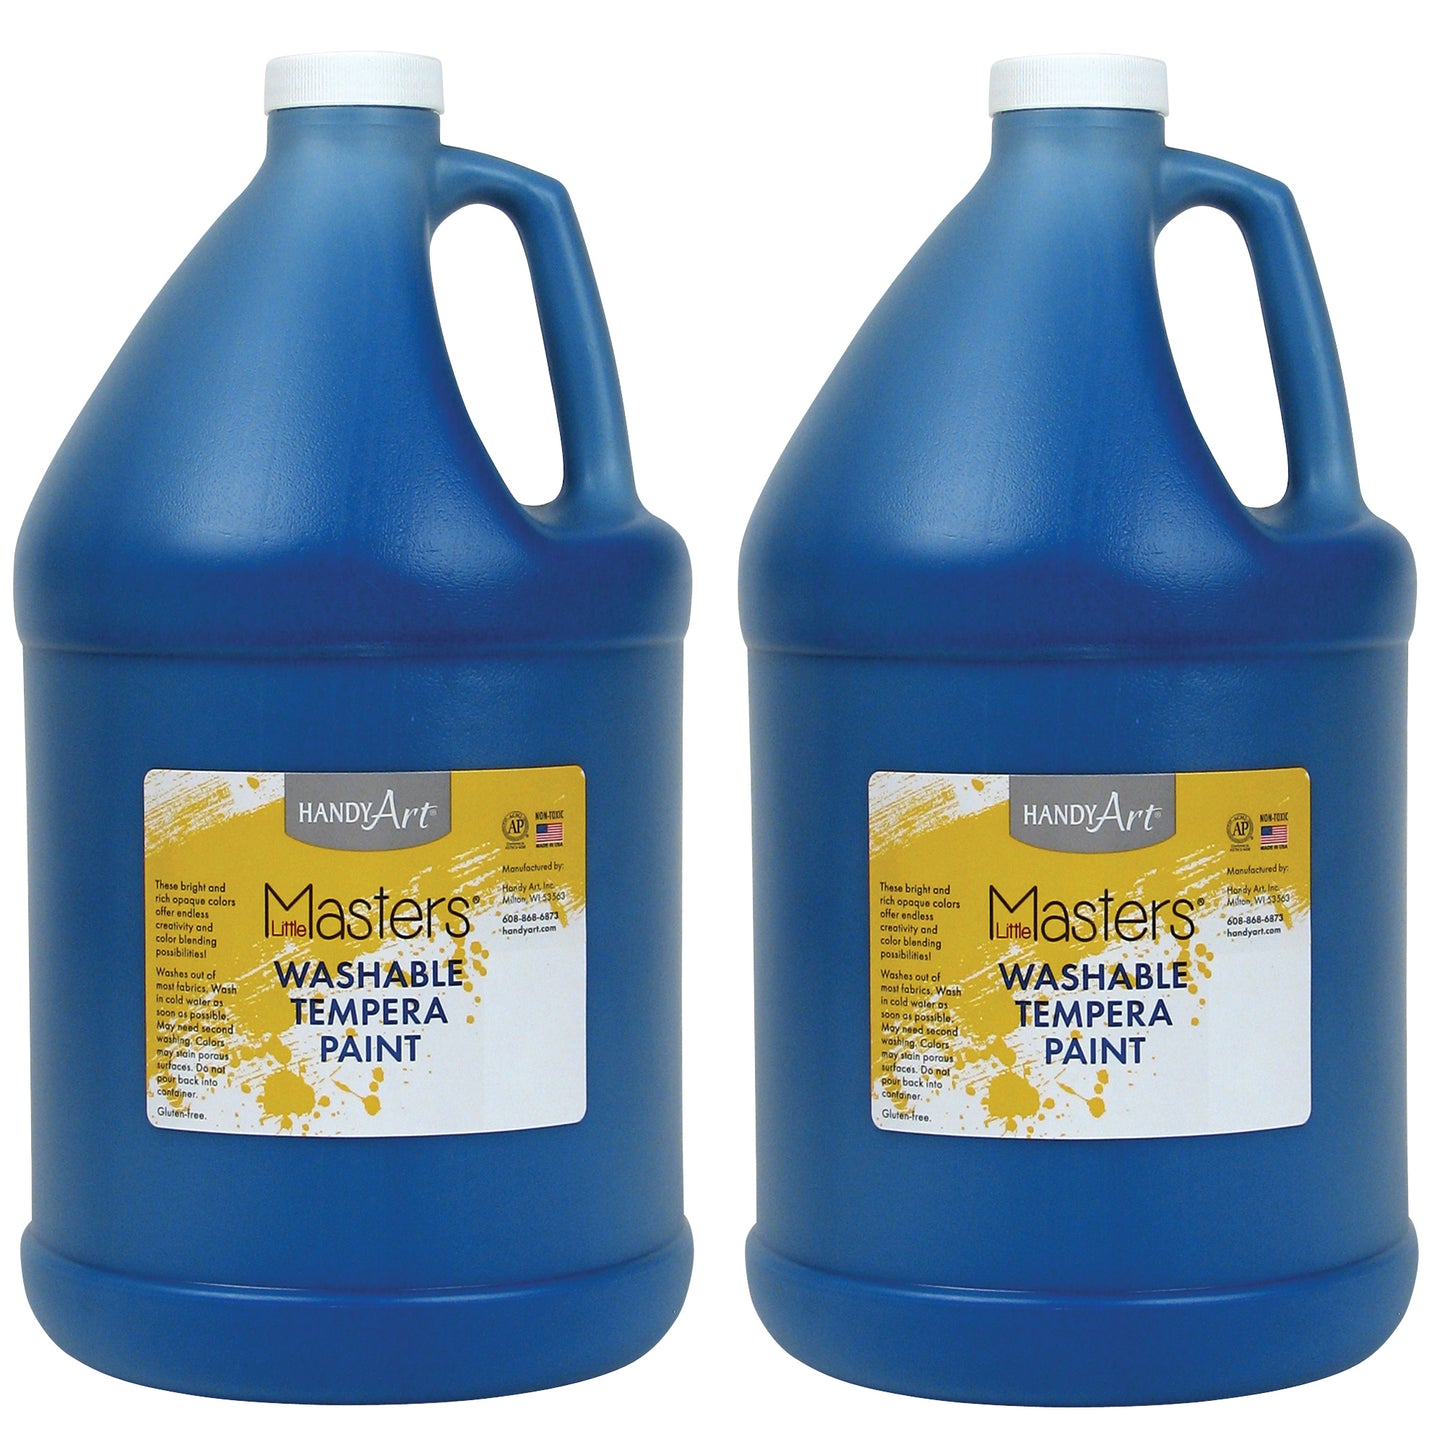 Little Masters® Washable Tempera Paint, Blue, Gallon, Pack of 2